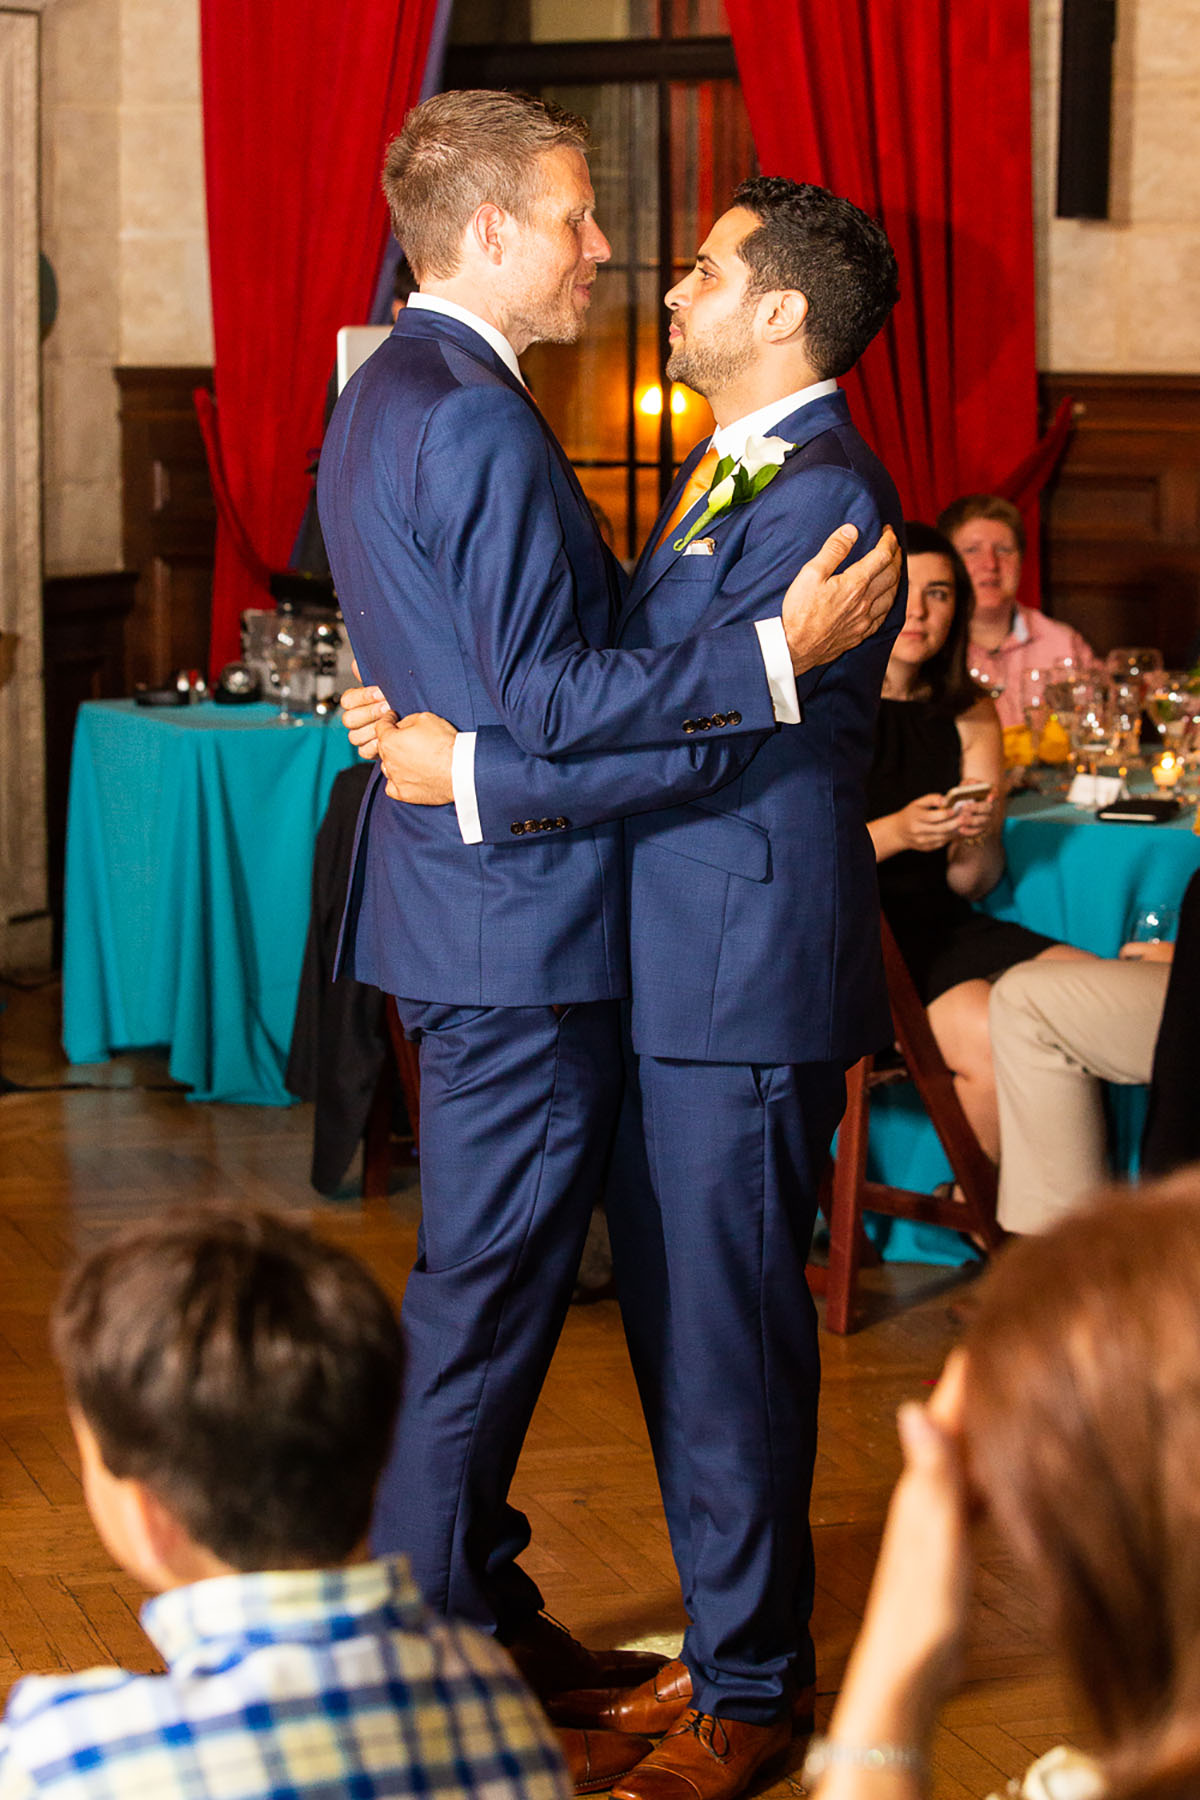 Romantic, artsy New York City wedding red backdrop blue tuxedos pink gold ties two grooms